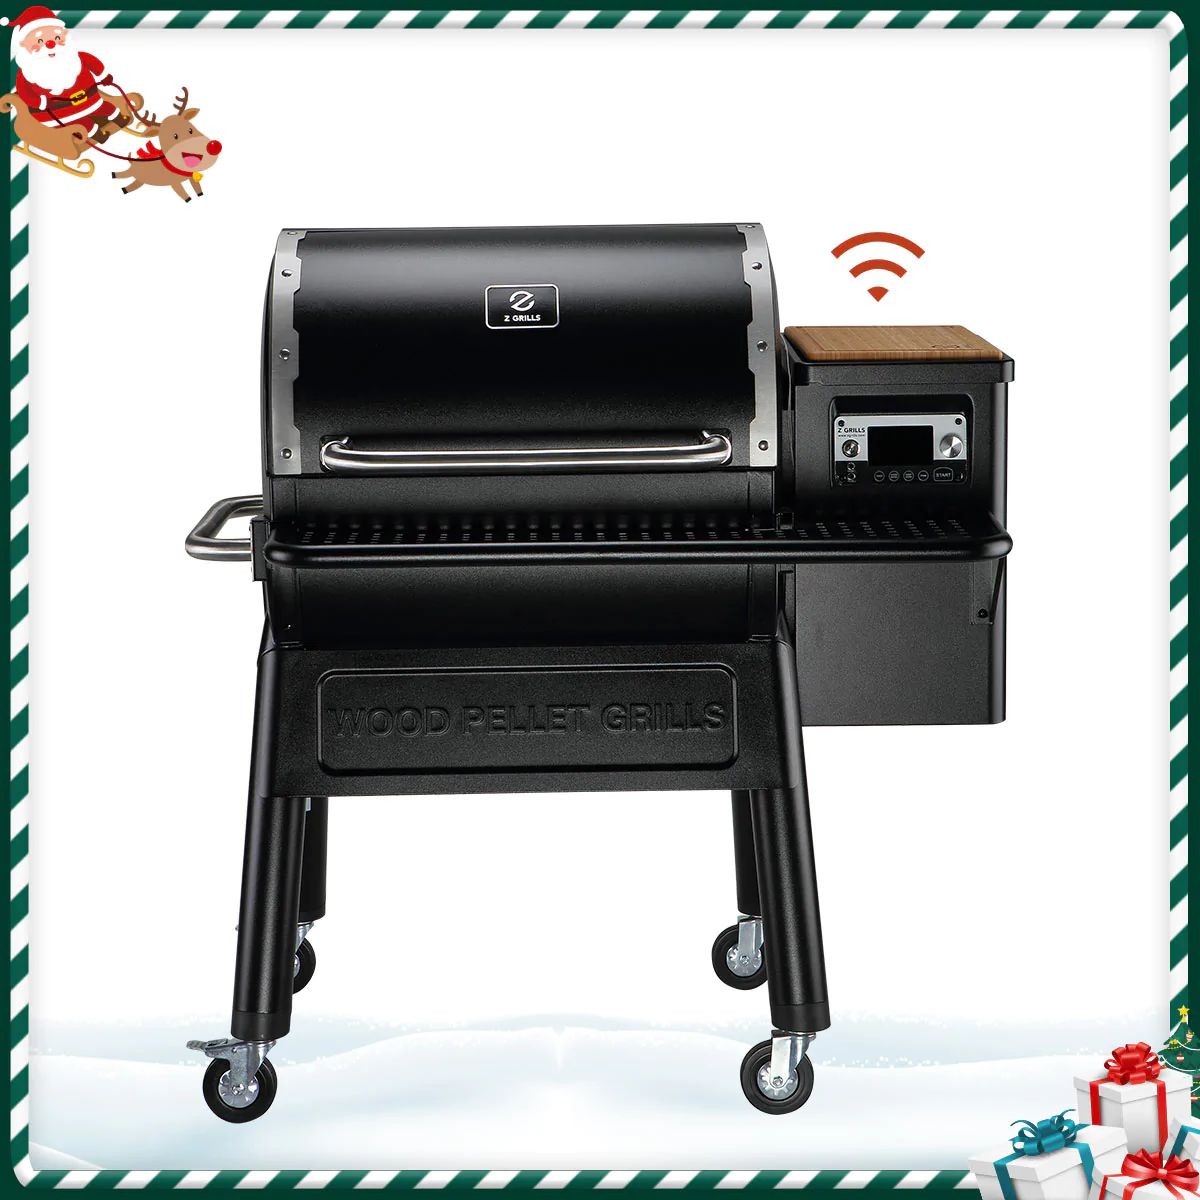 7052B Multitasker Wood Pellet Grill with Wi-Fi by Z Grills